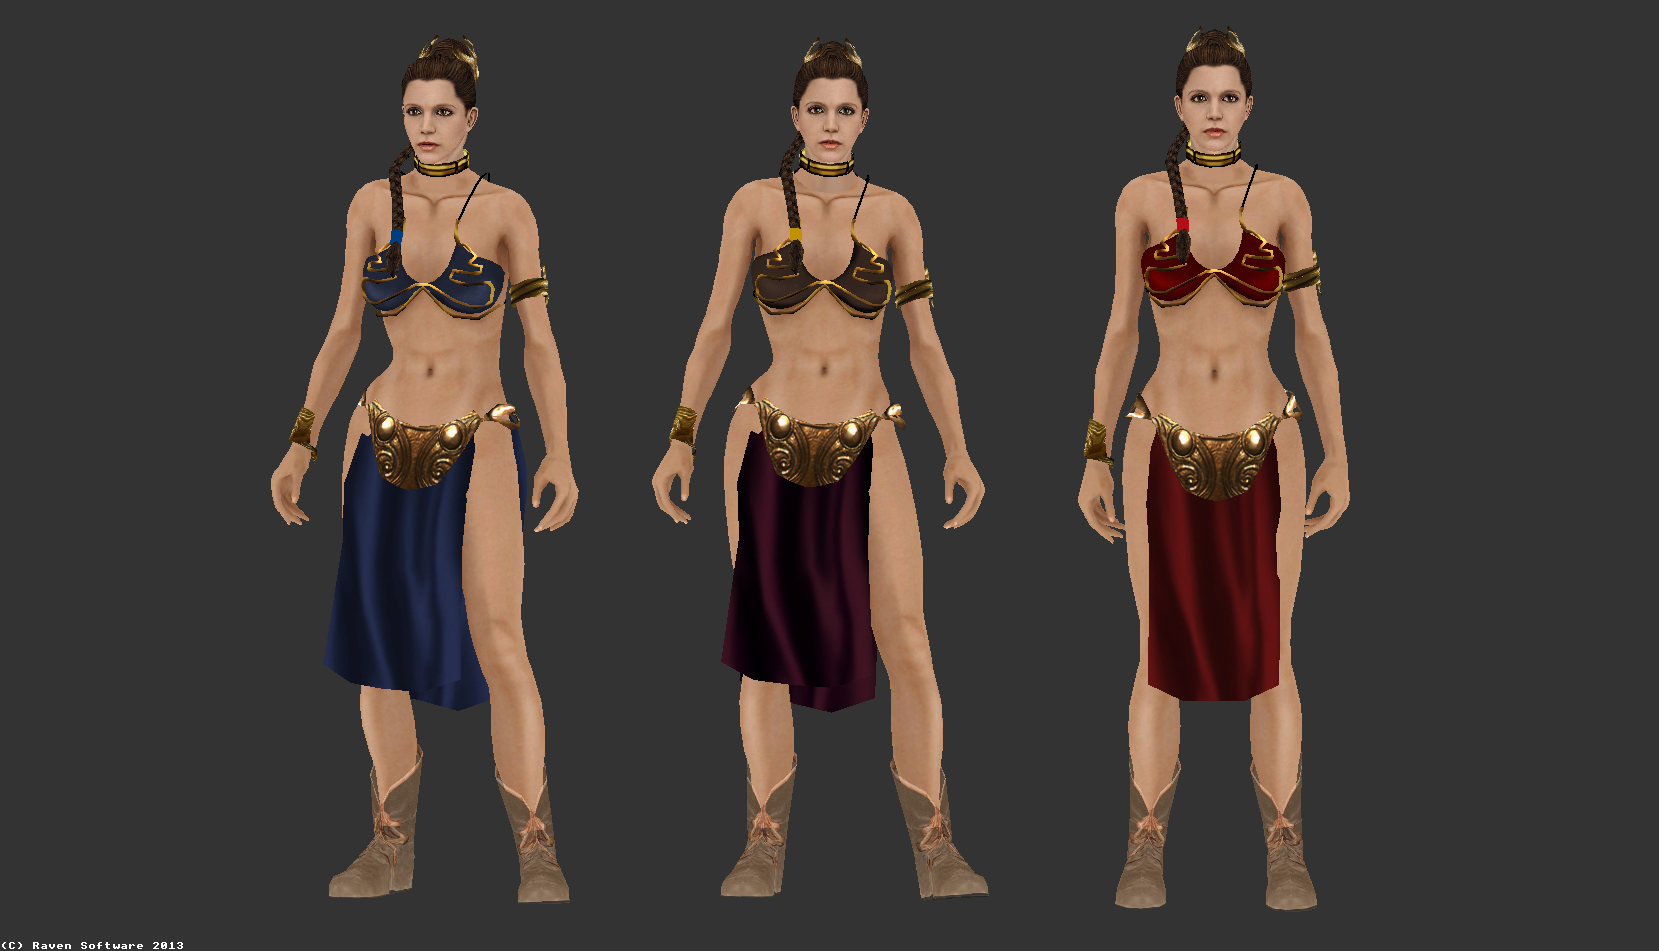 More information about "Princess Leia HD"